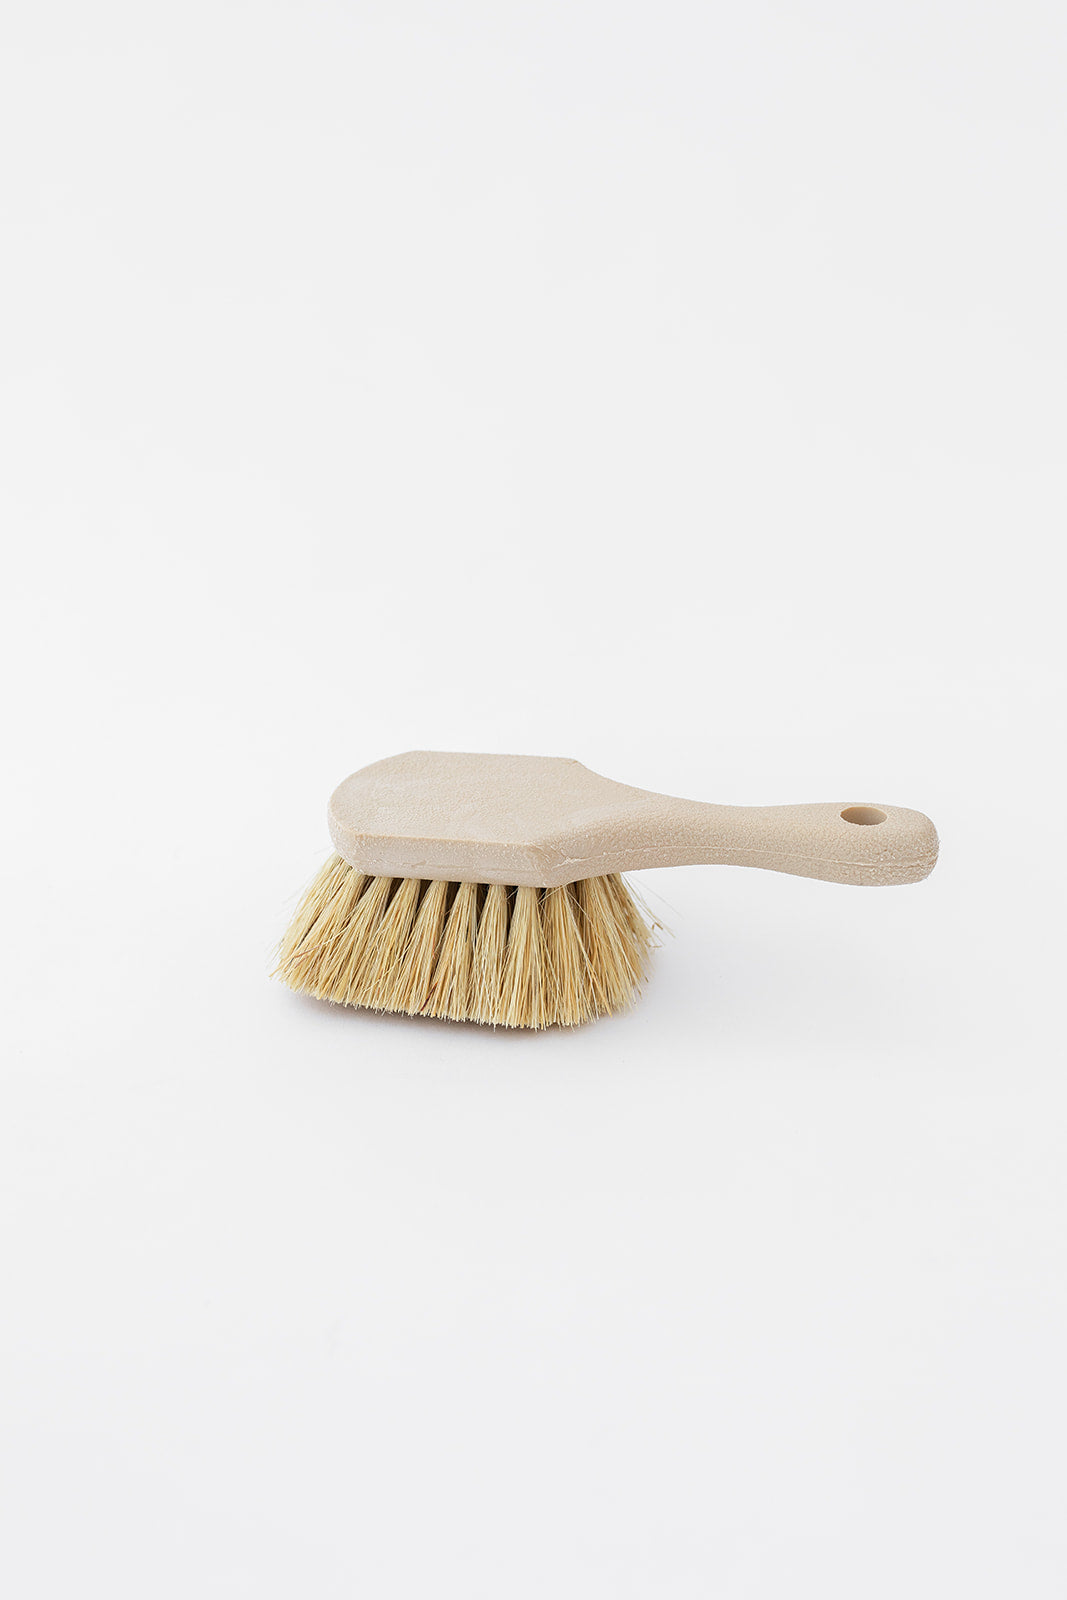 The Dry Brush with Handle